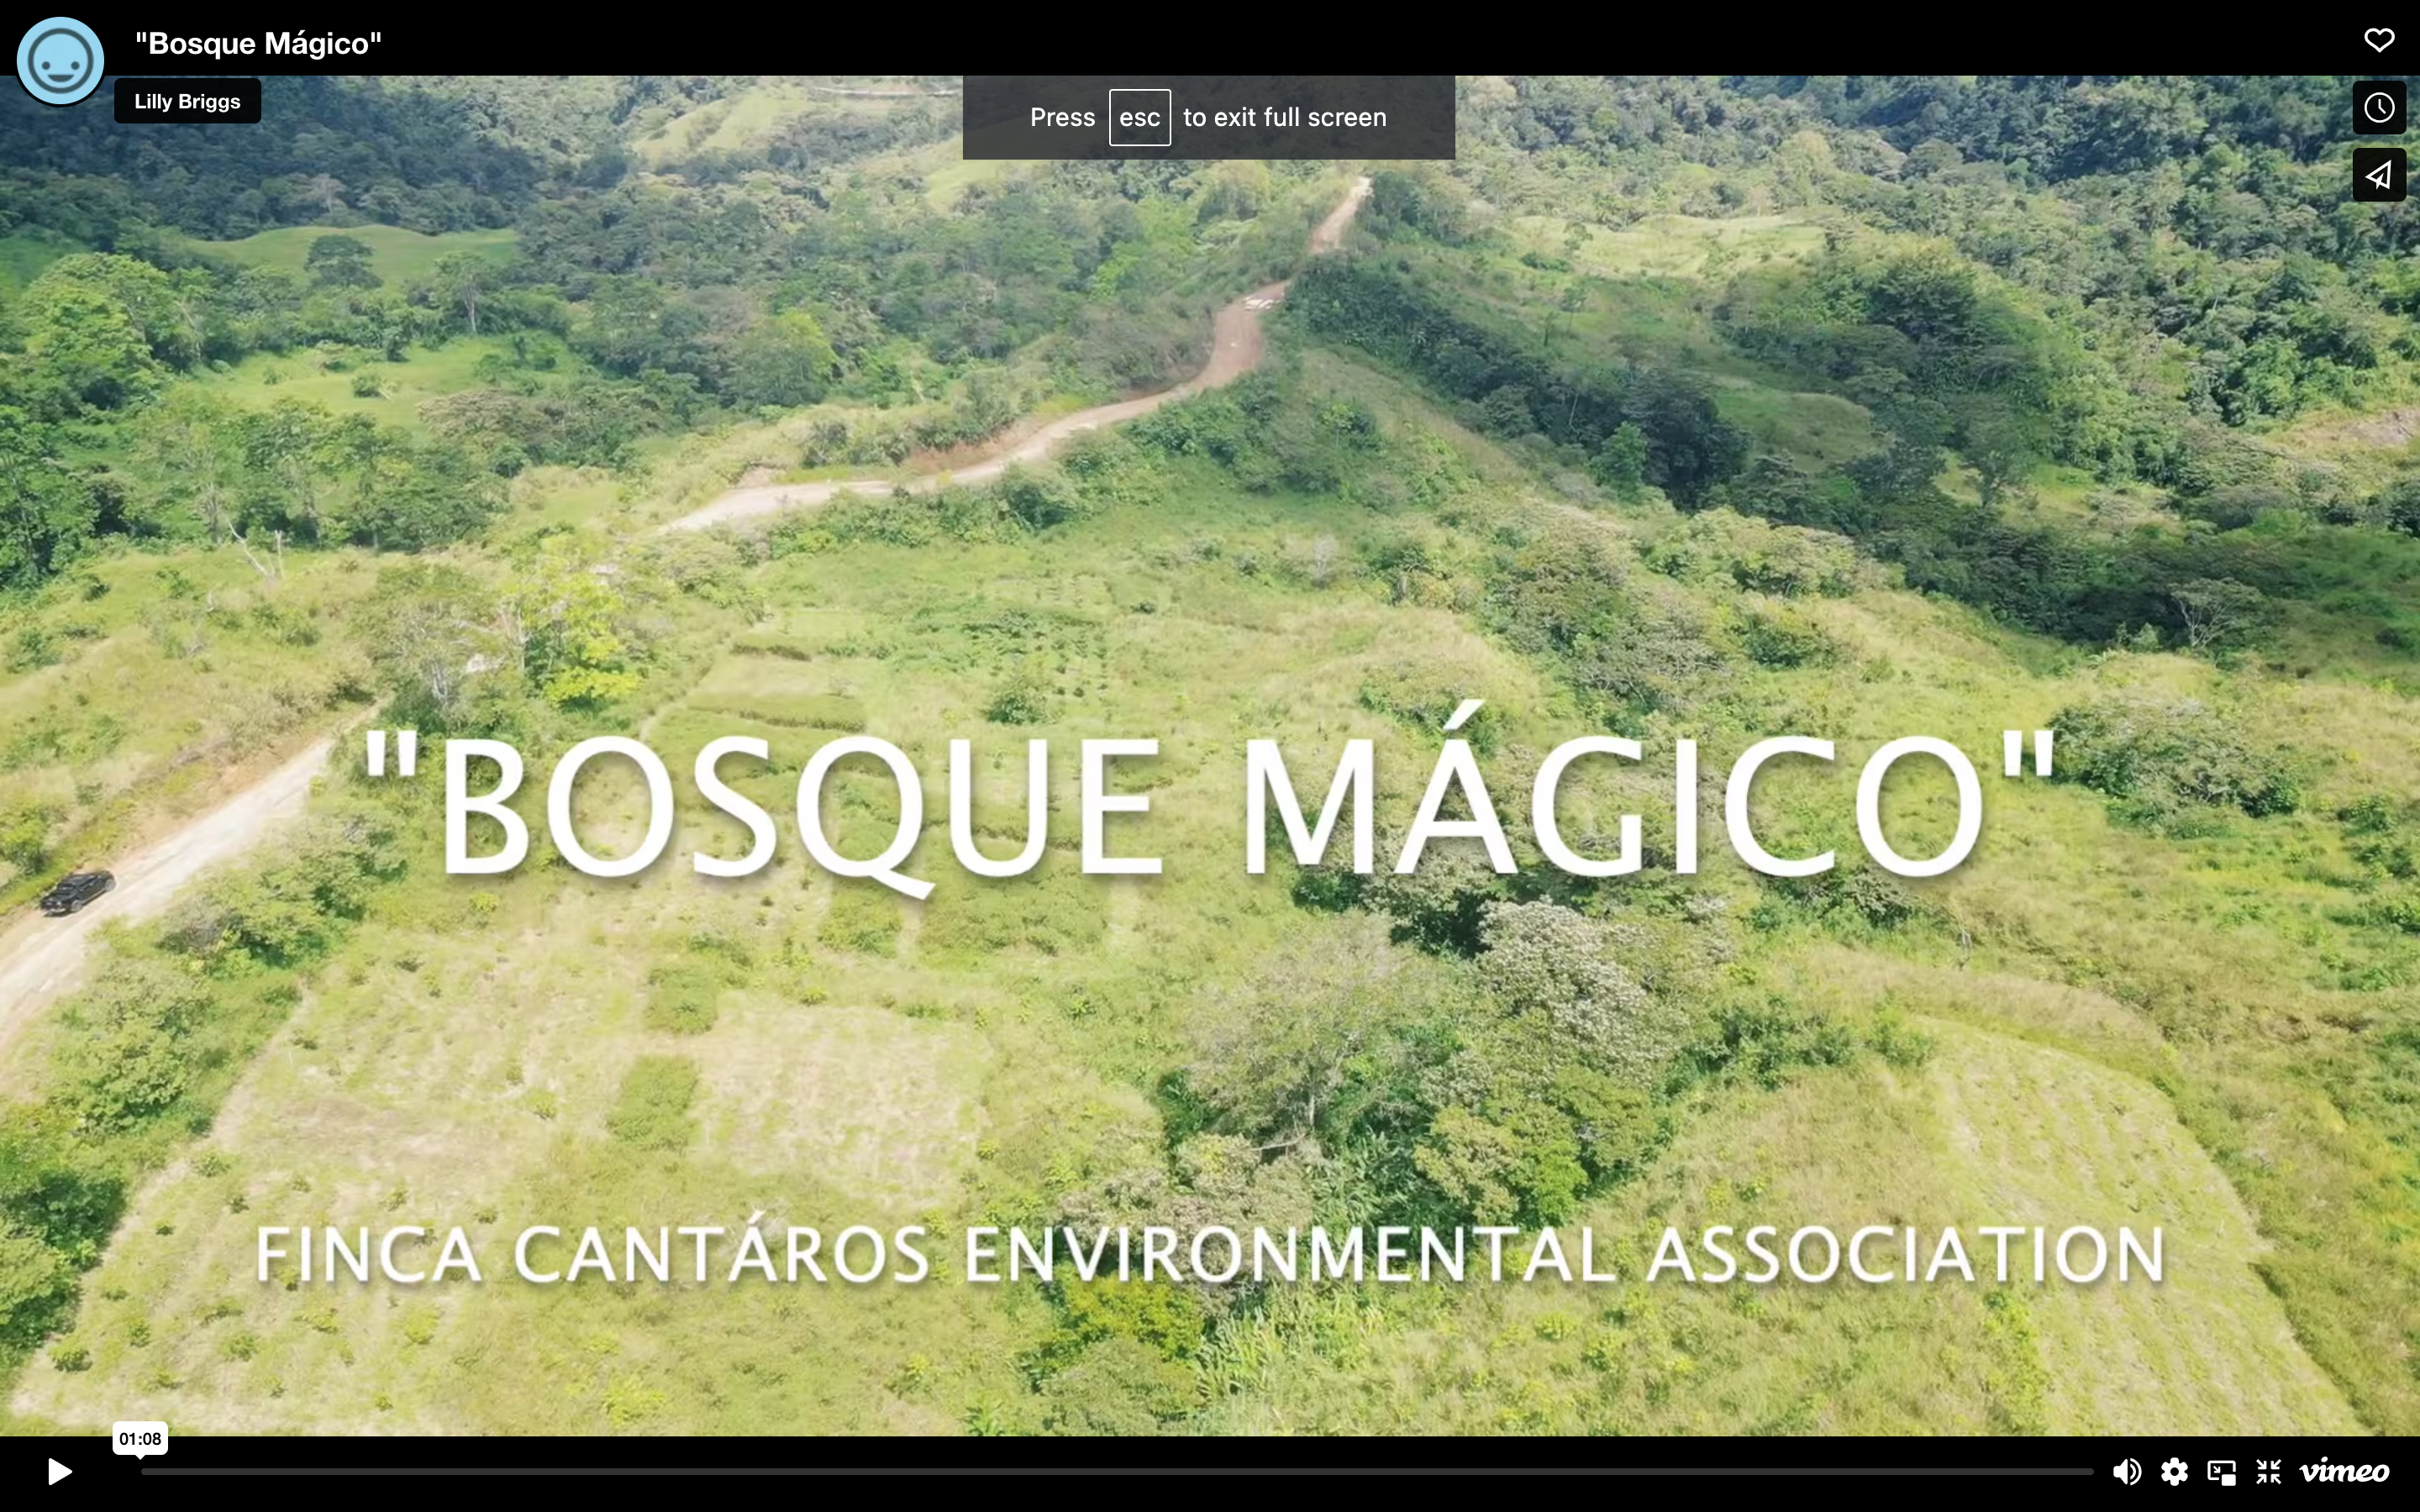 Learn more about our “Bosque Mágico” (Magic Forest) project